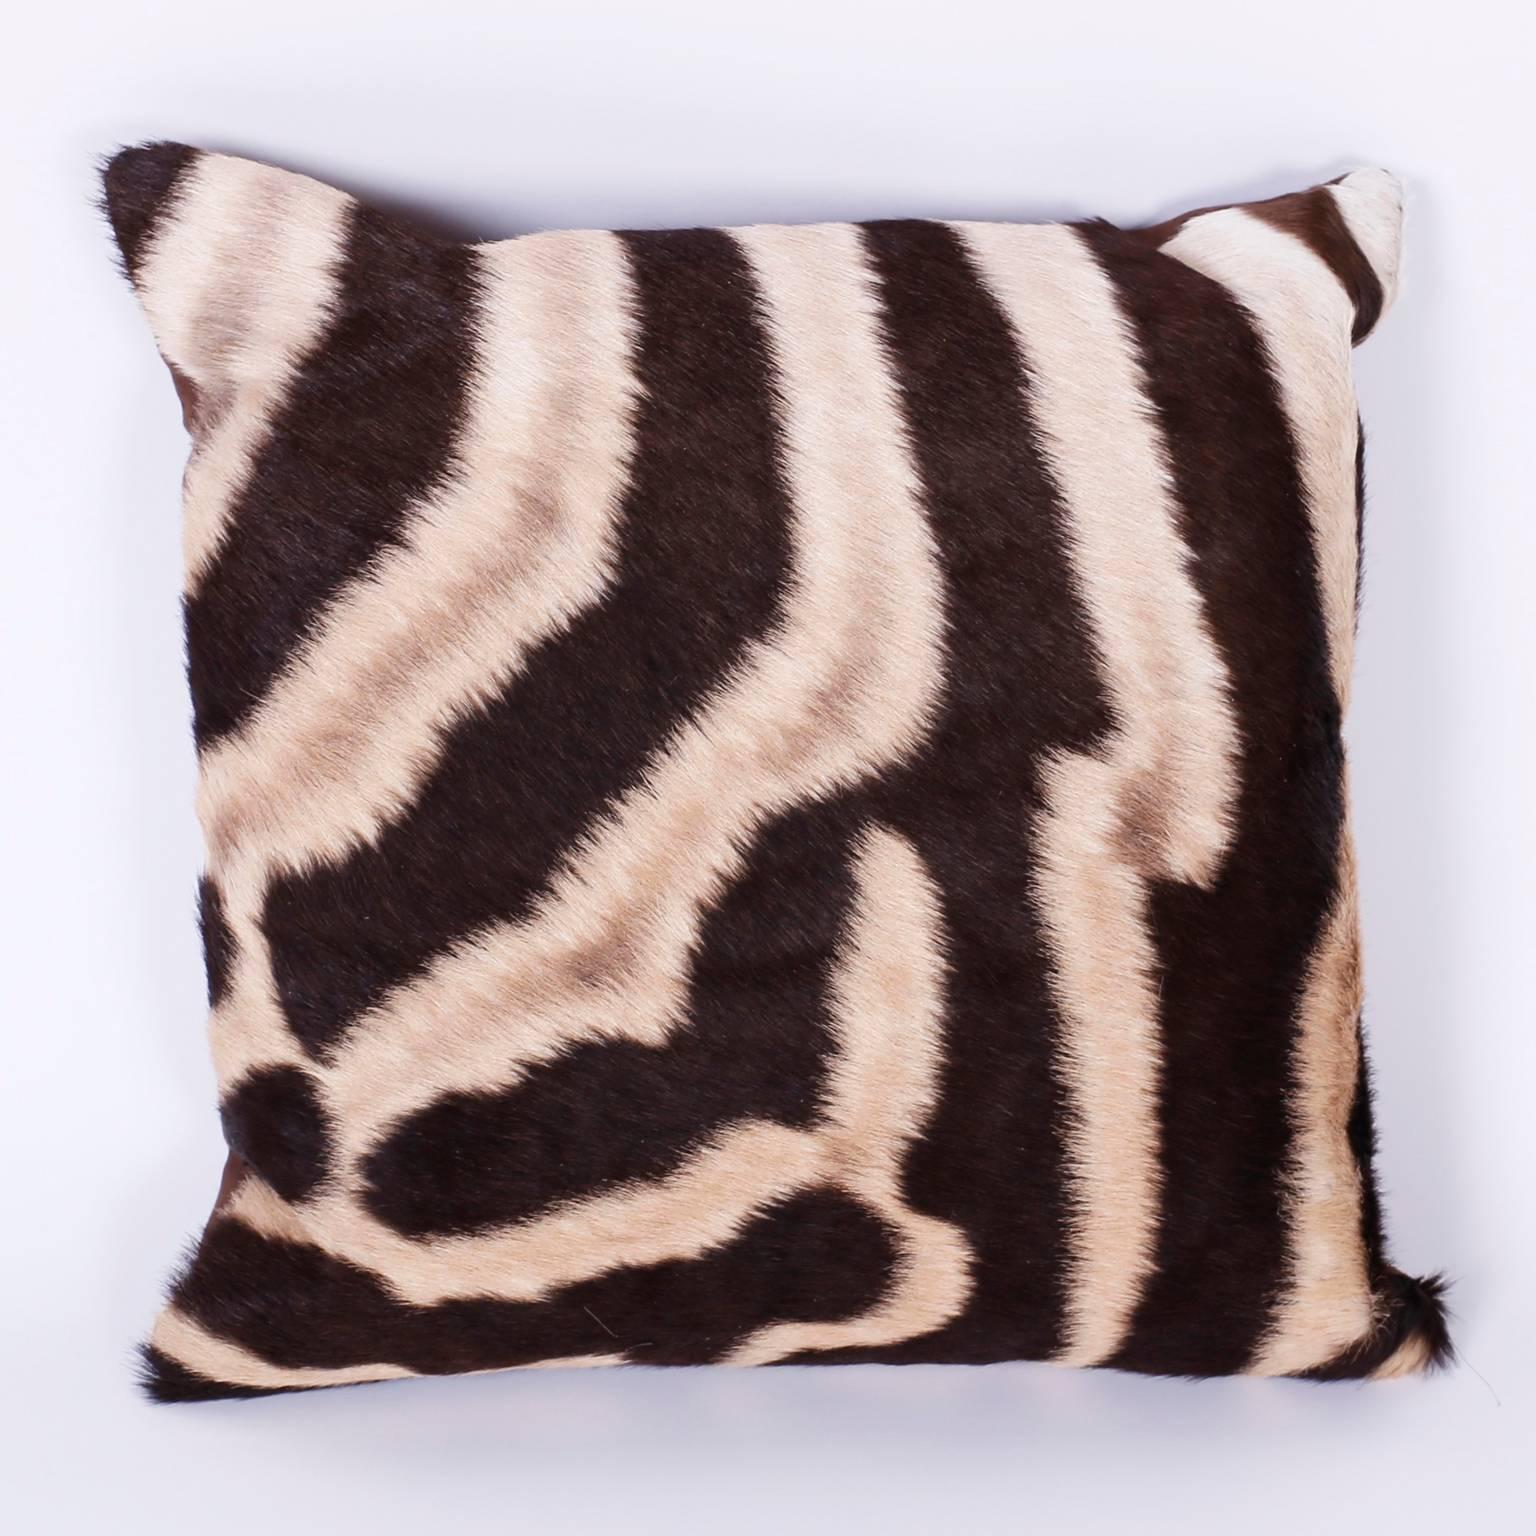 South African Pair of Zebra Hide Pillows